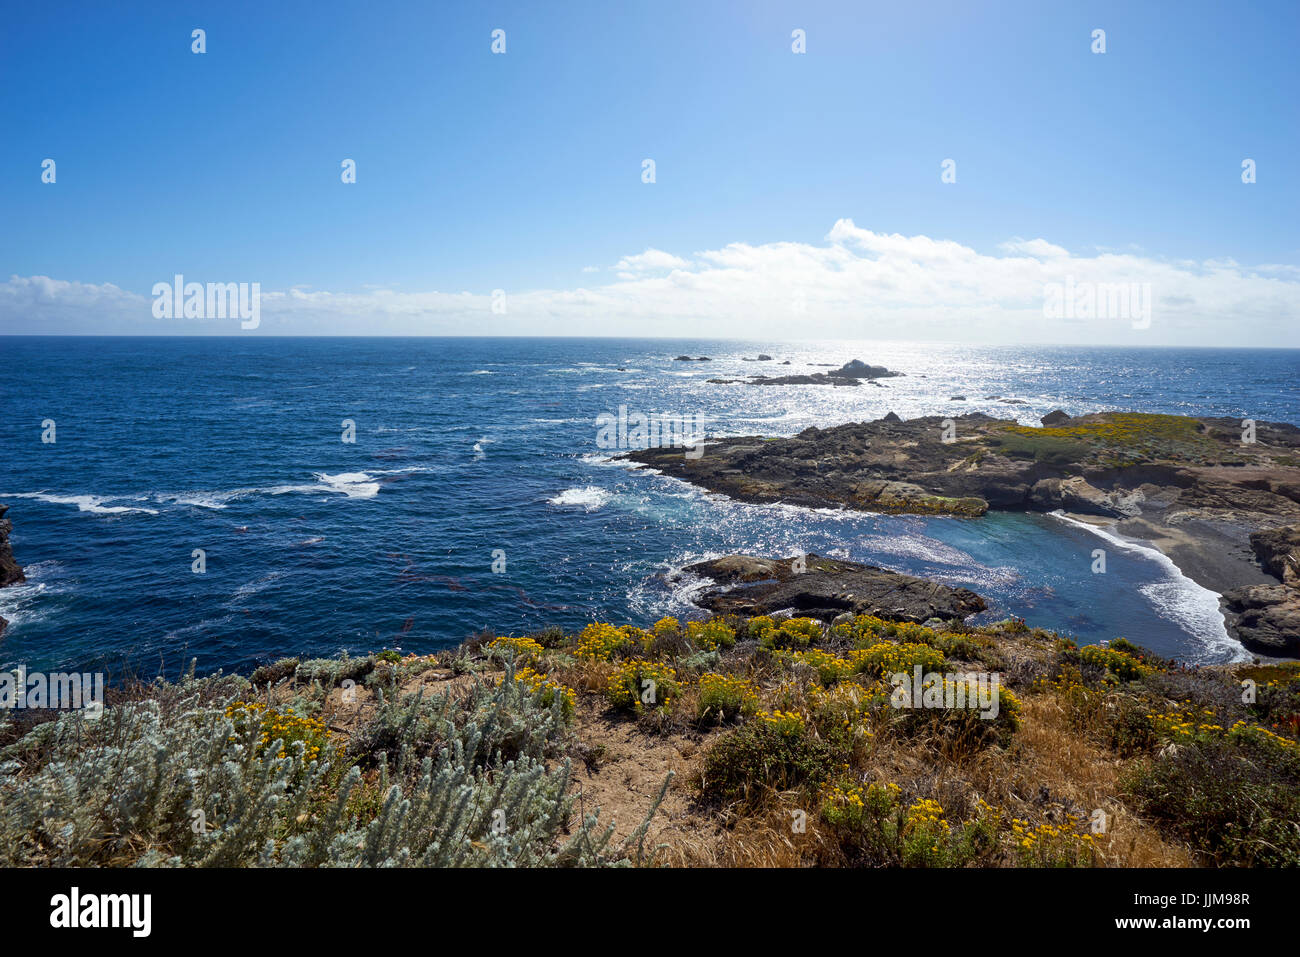 Wildflowers frame this view from above a cove westward into the misty marine layer of the Pacific Ocean Stock Photo